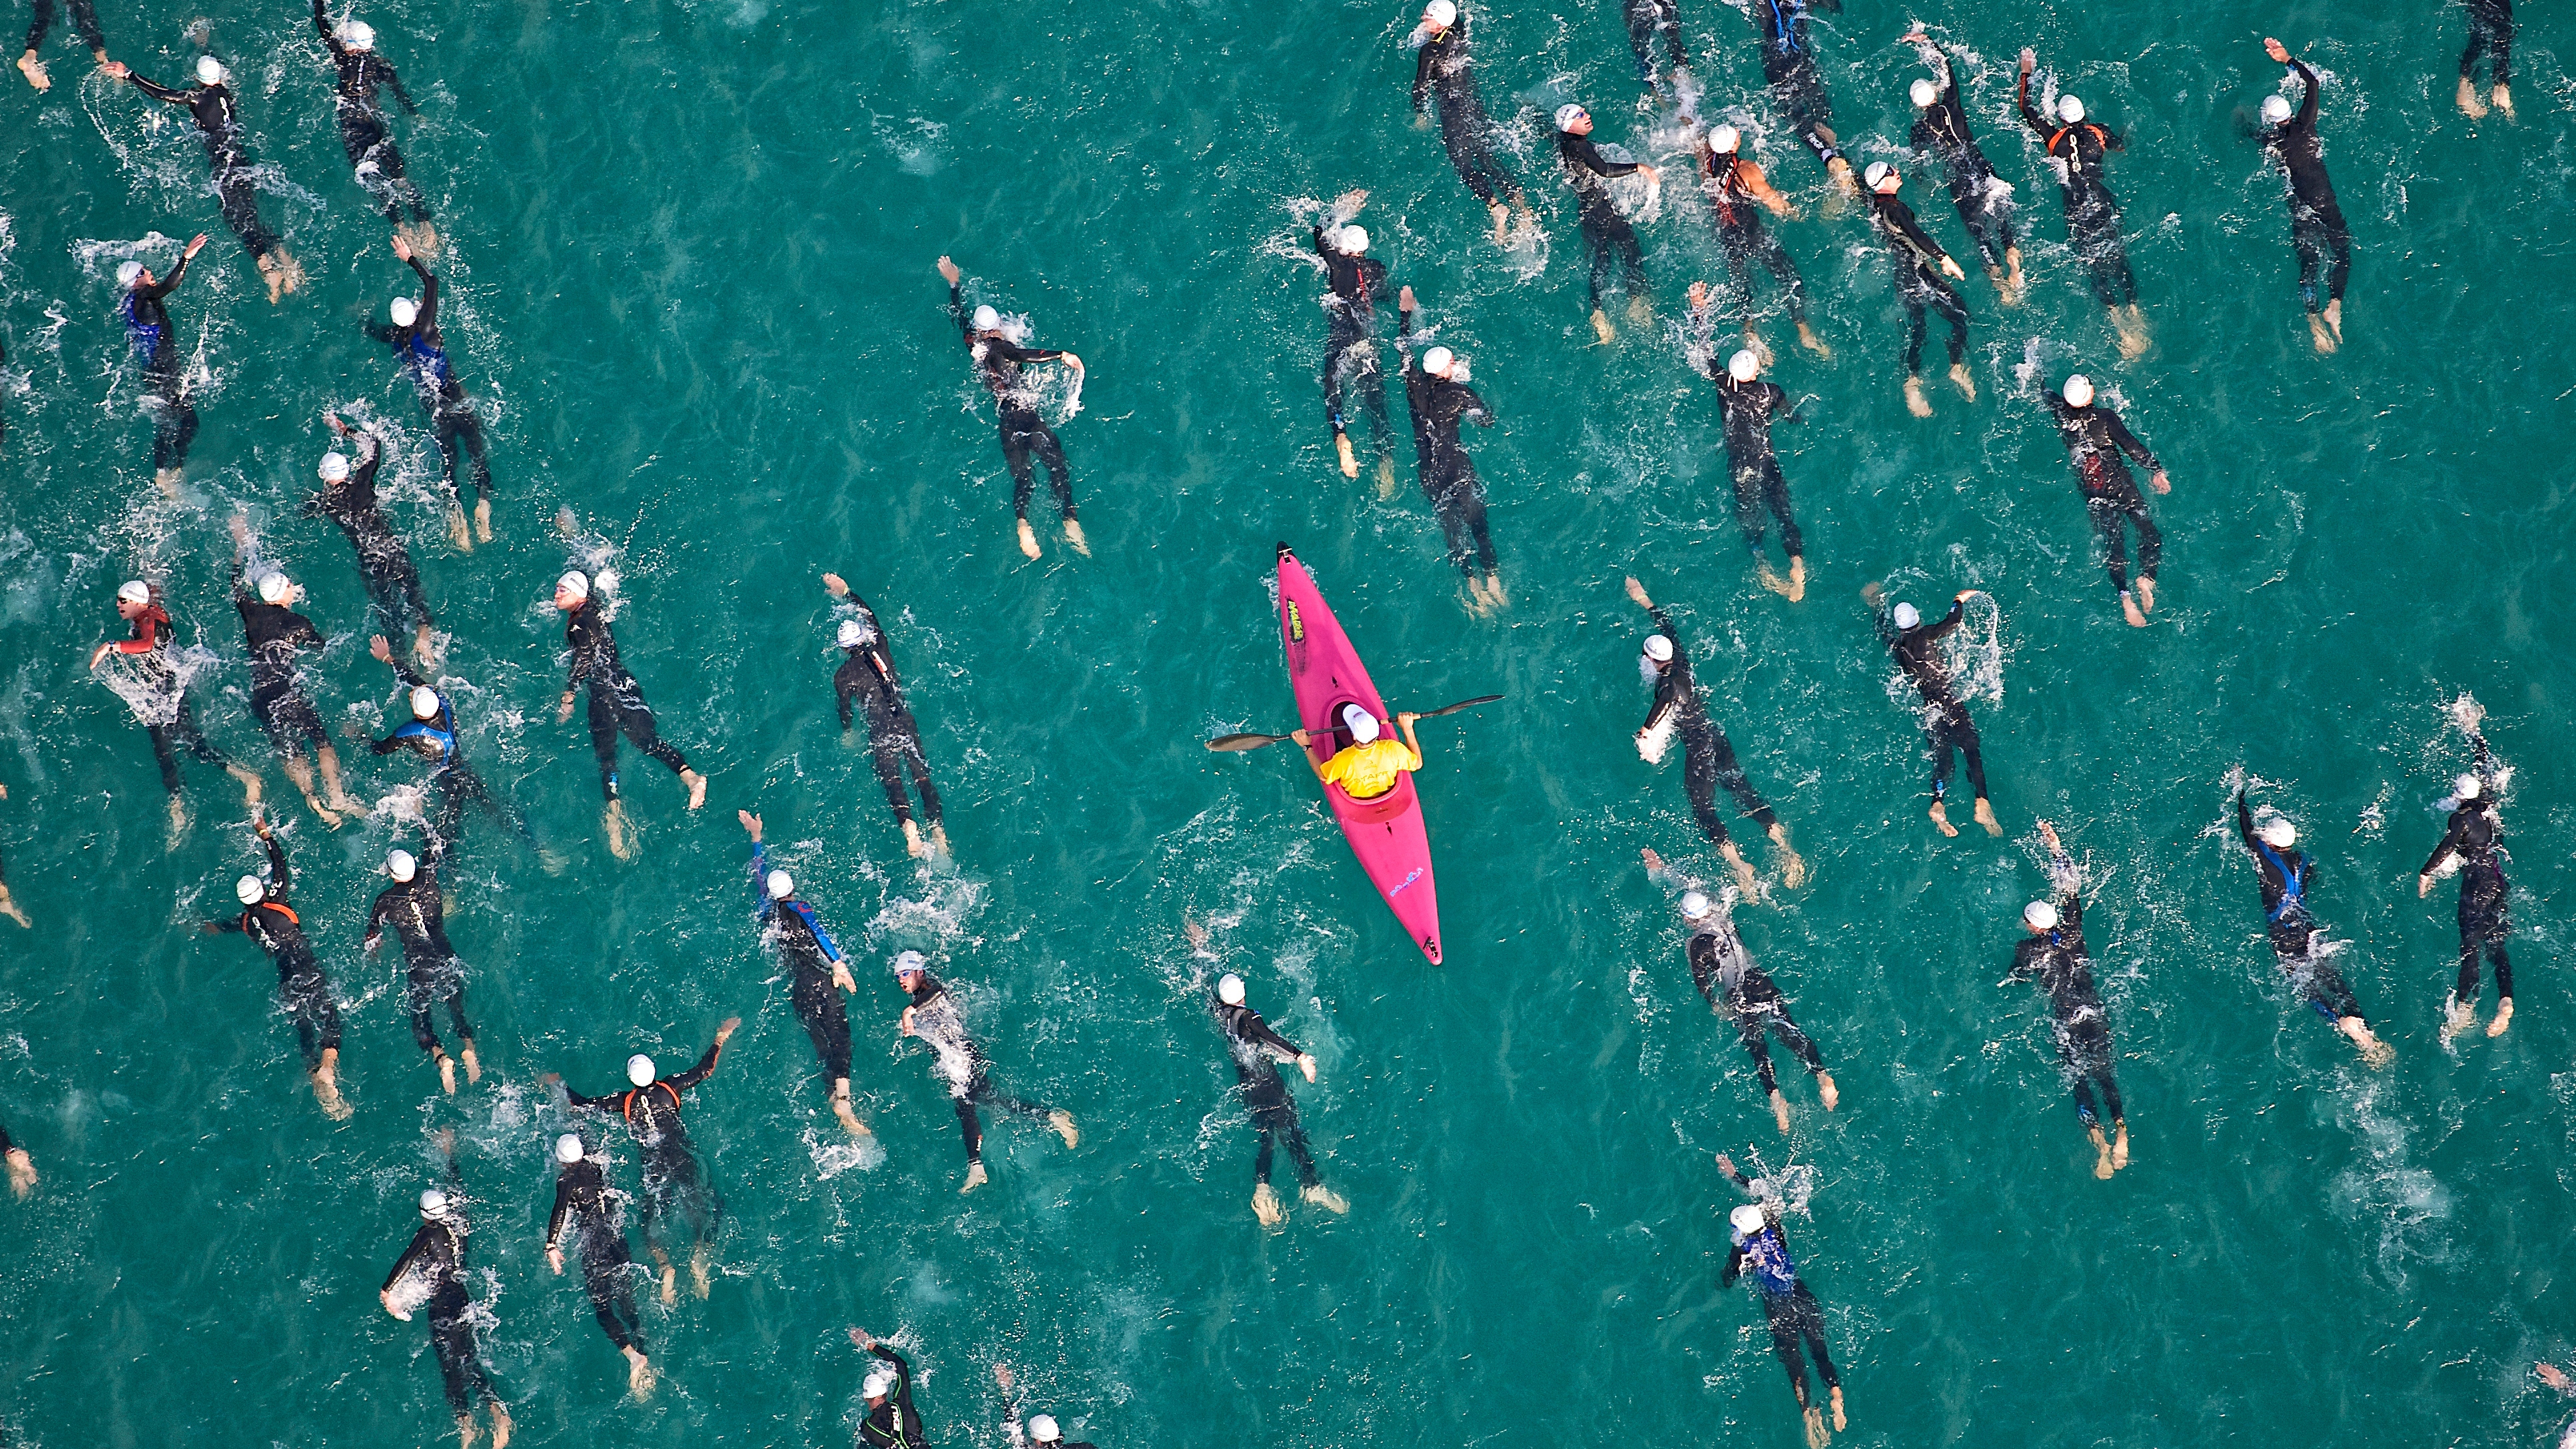 Swimmers in water - stage image for Munich Re Solutions overview page